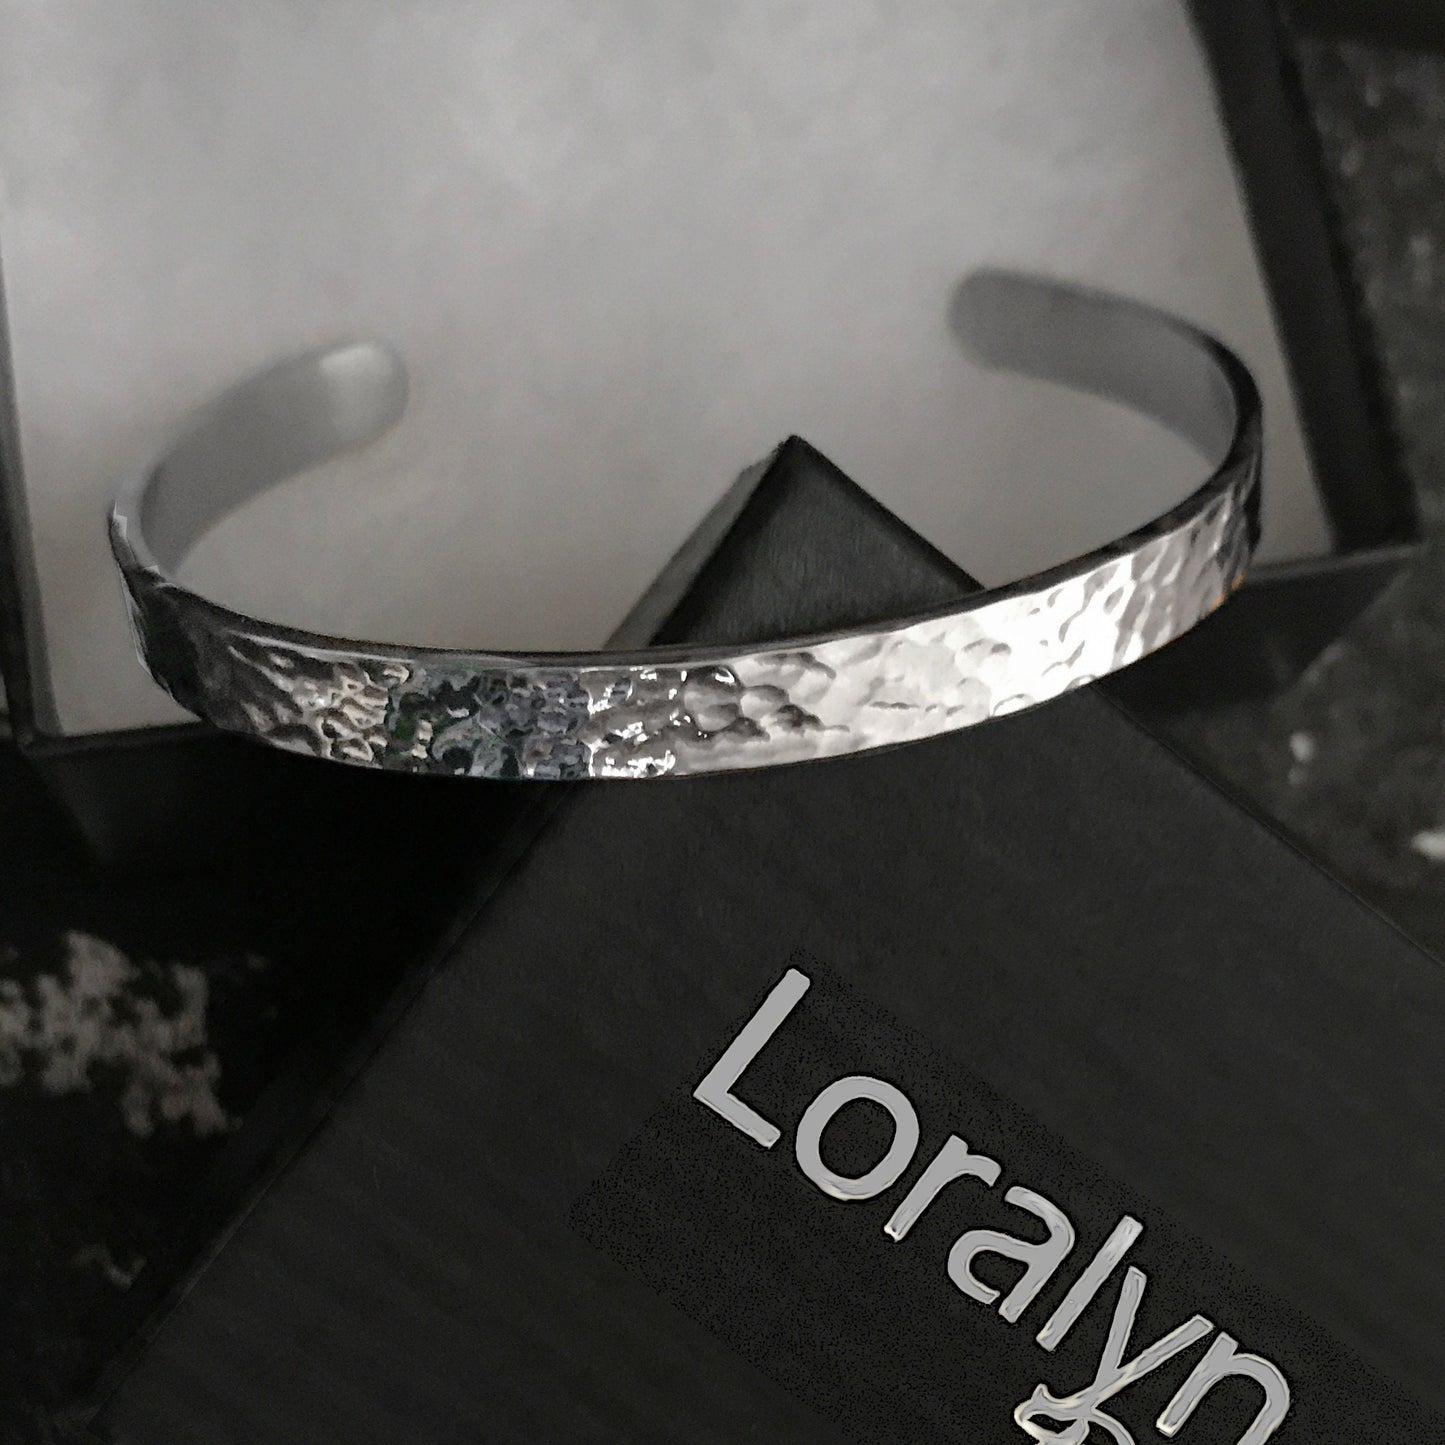 Stainless Steel Hammered Cuff Bracelet, Unisex Design, Mens Thin Bangle, Polished Silver Finish, Gift for Women, graduation gift